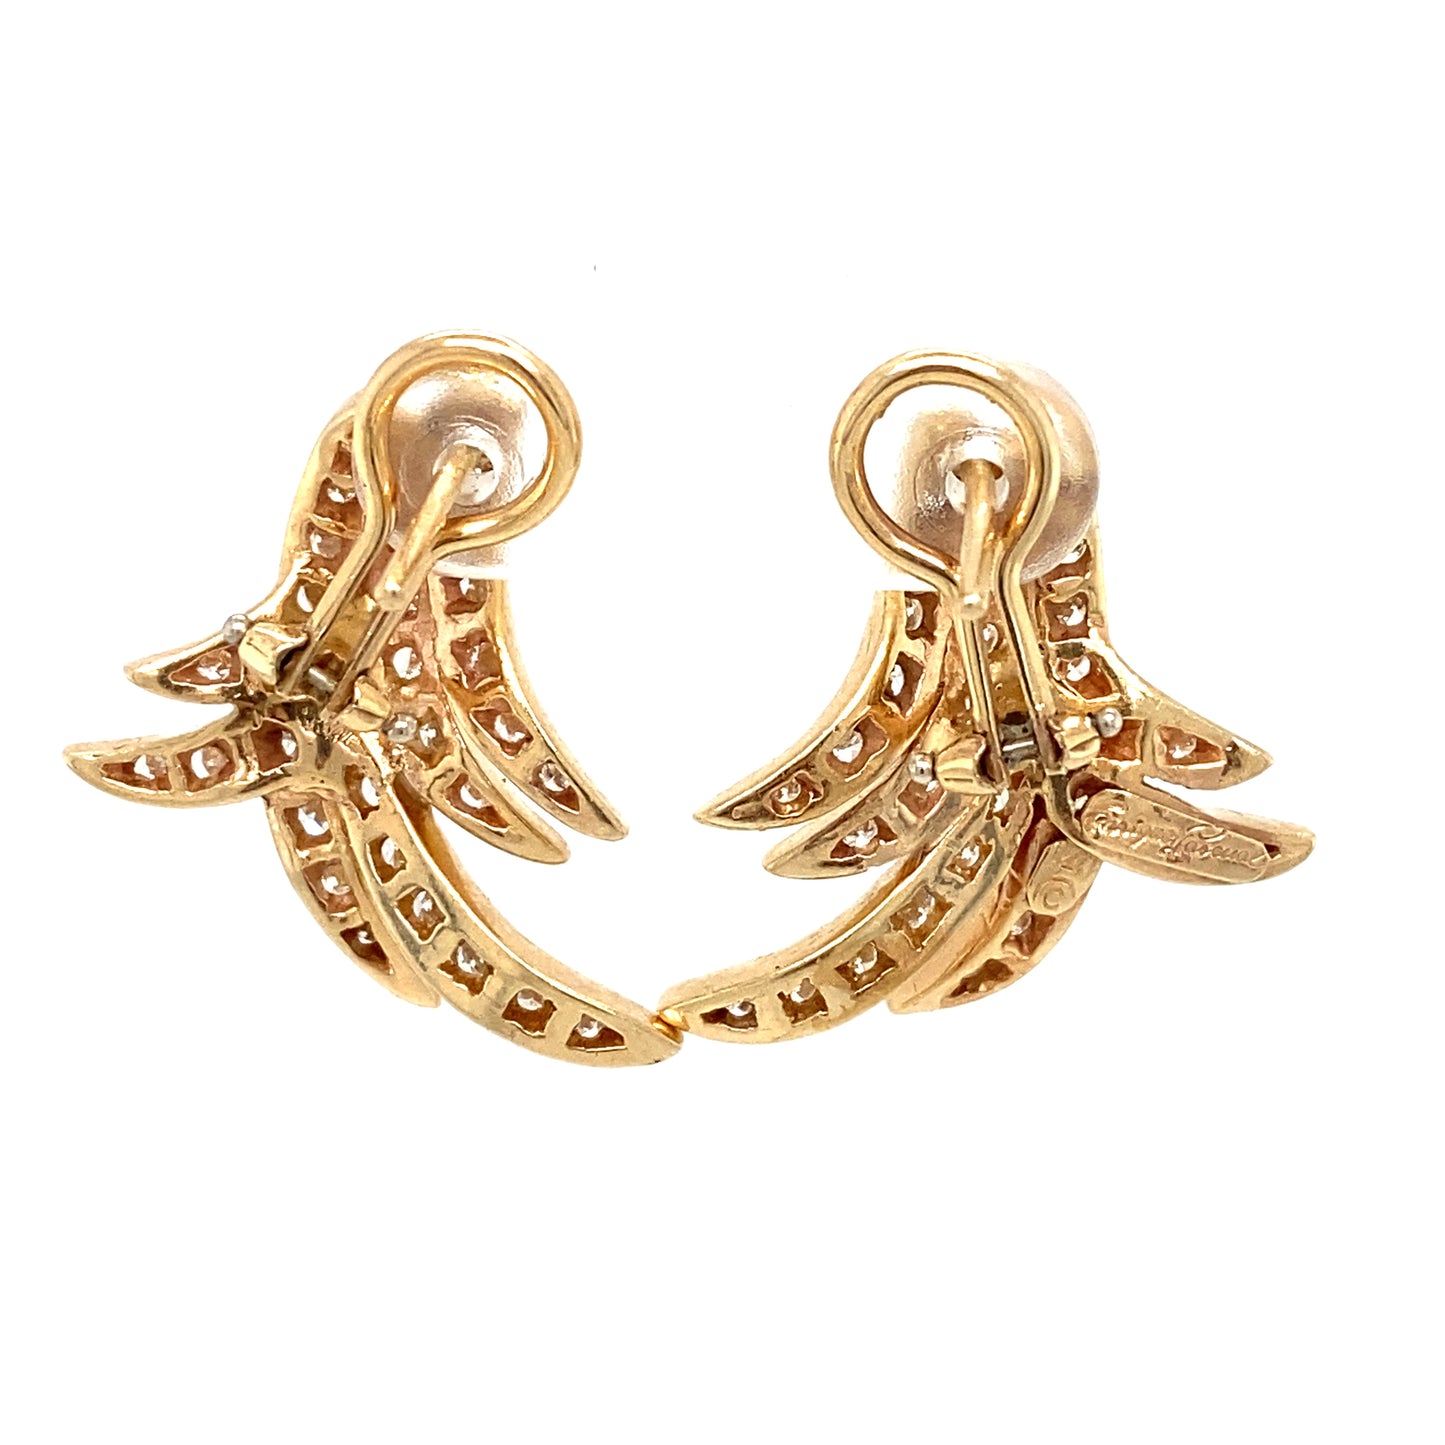 Enrique Pascual Diamond Feather Earrings in 14K Gold